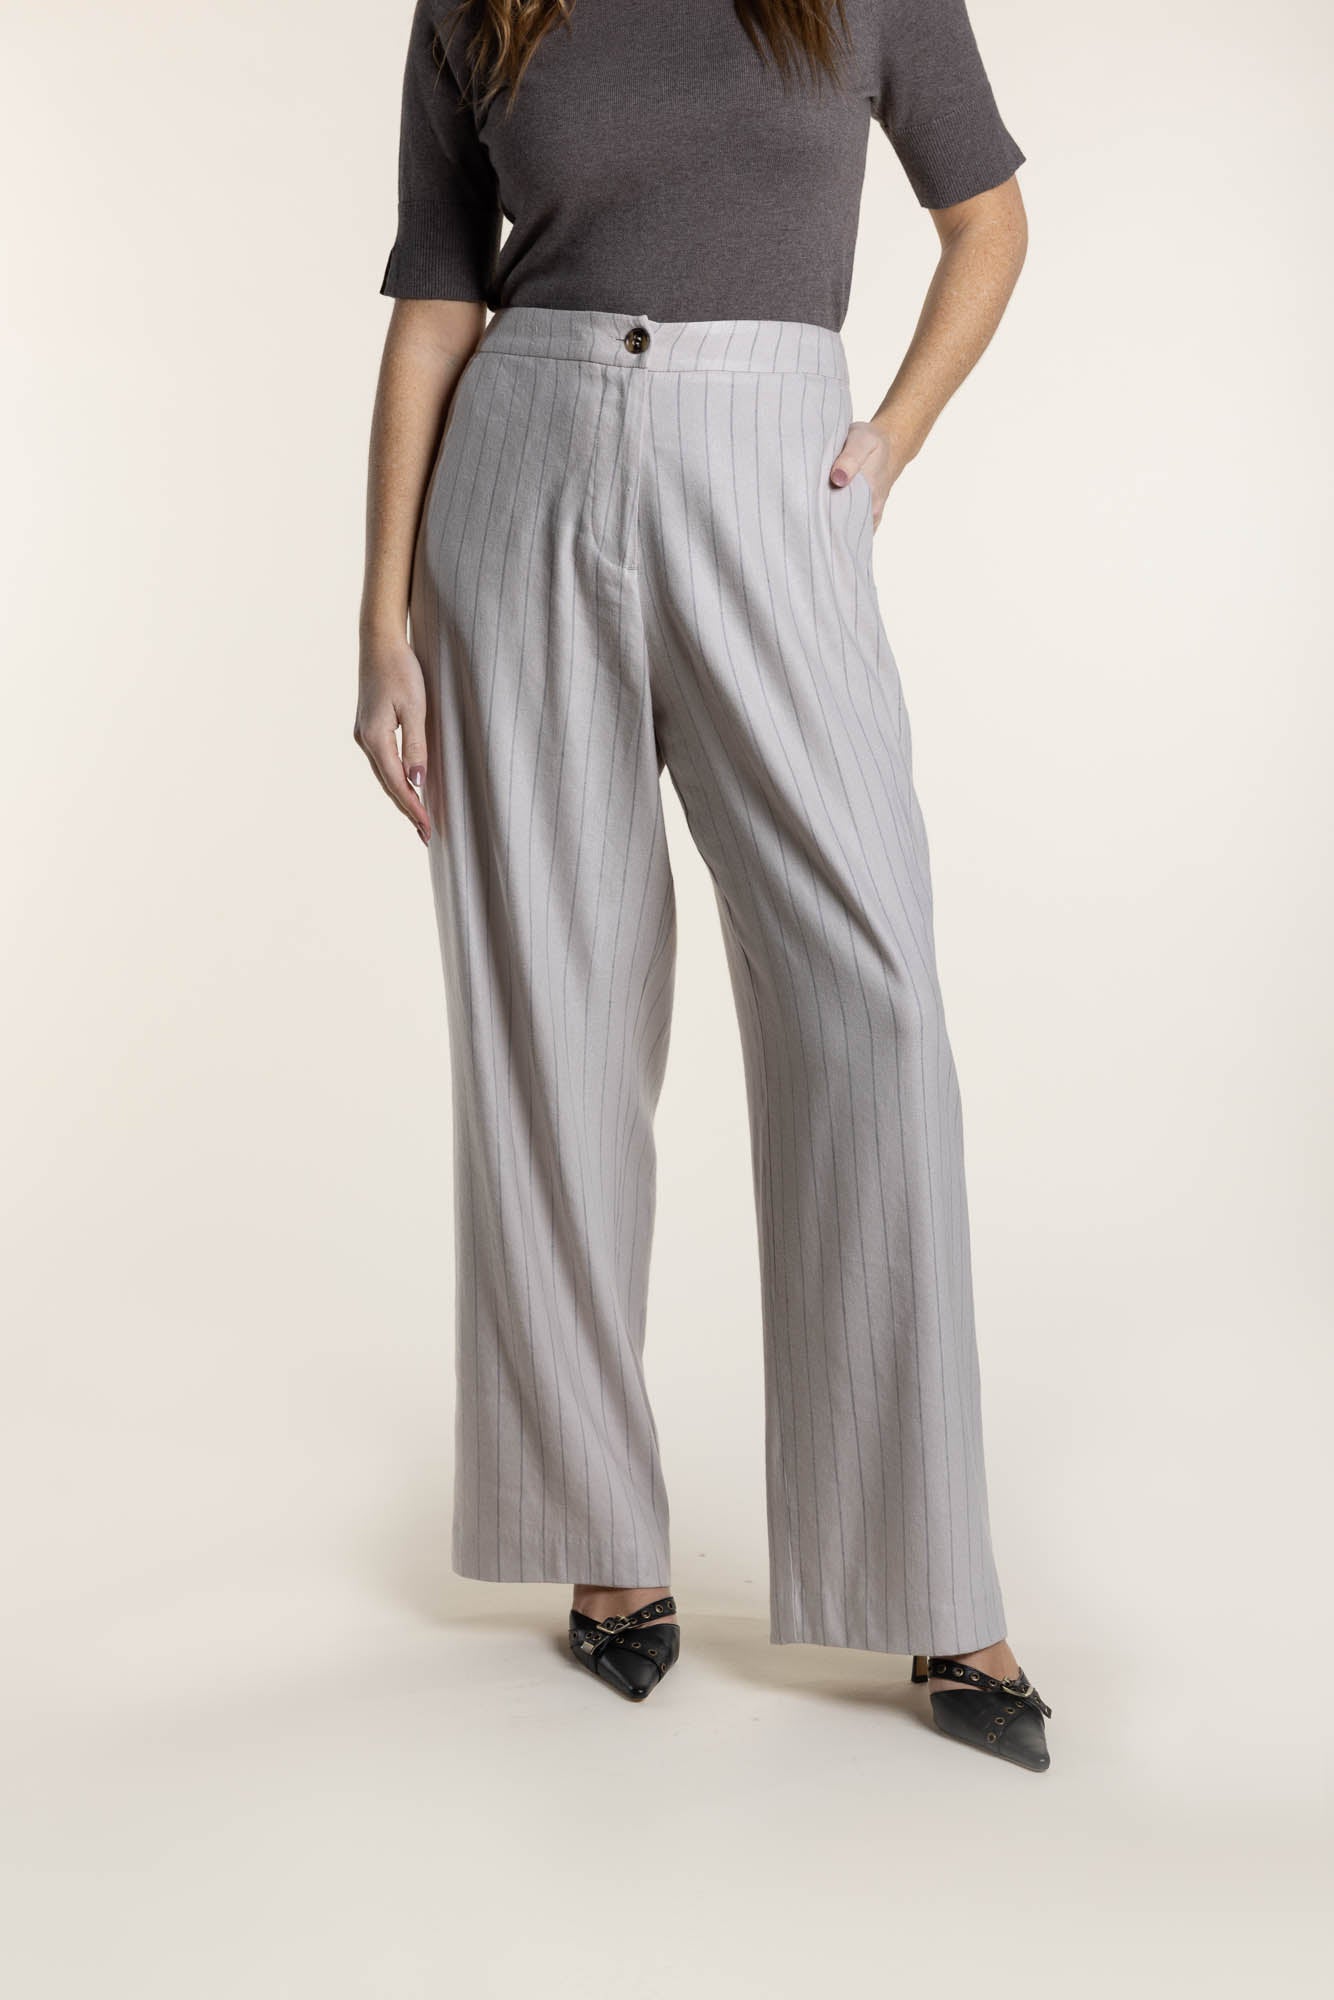 Two T's Striped Pant - Natural Stripe